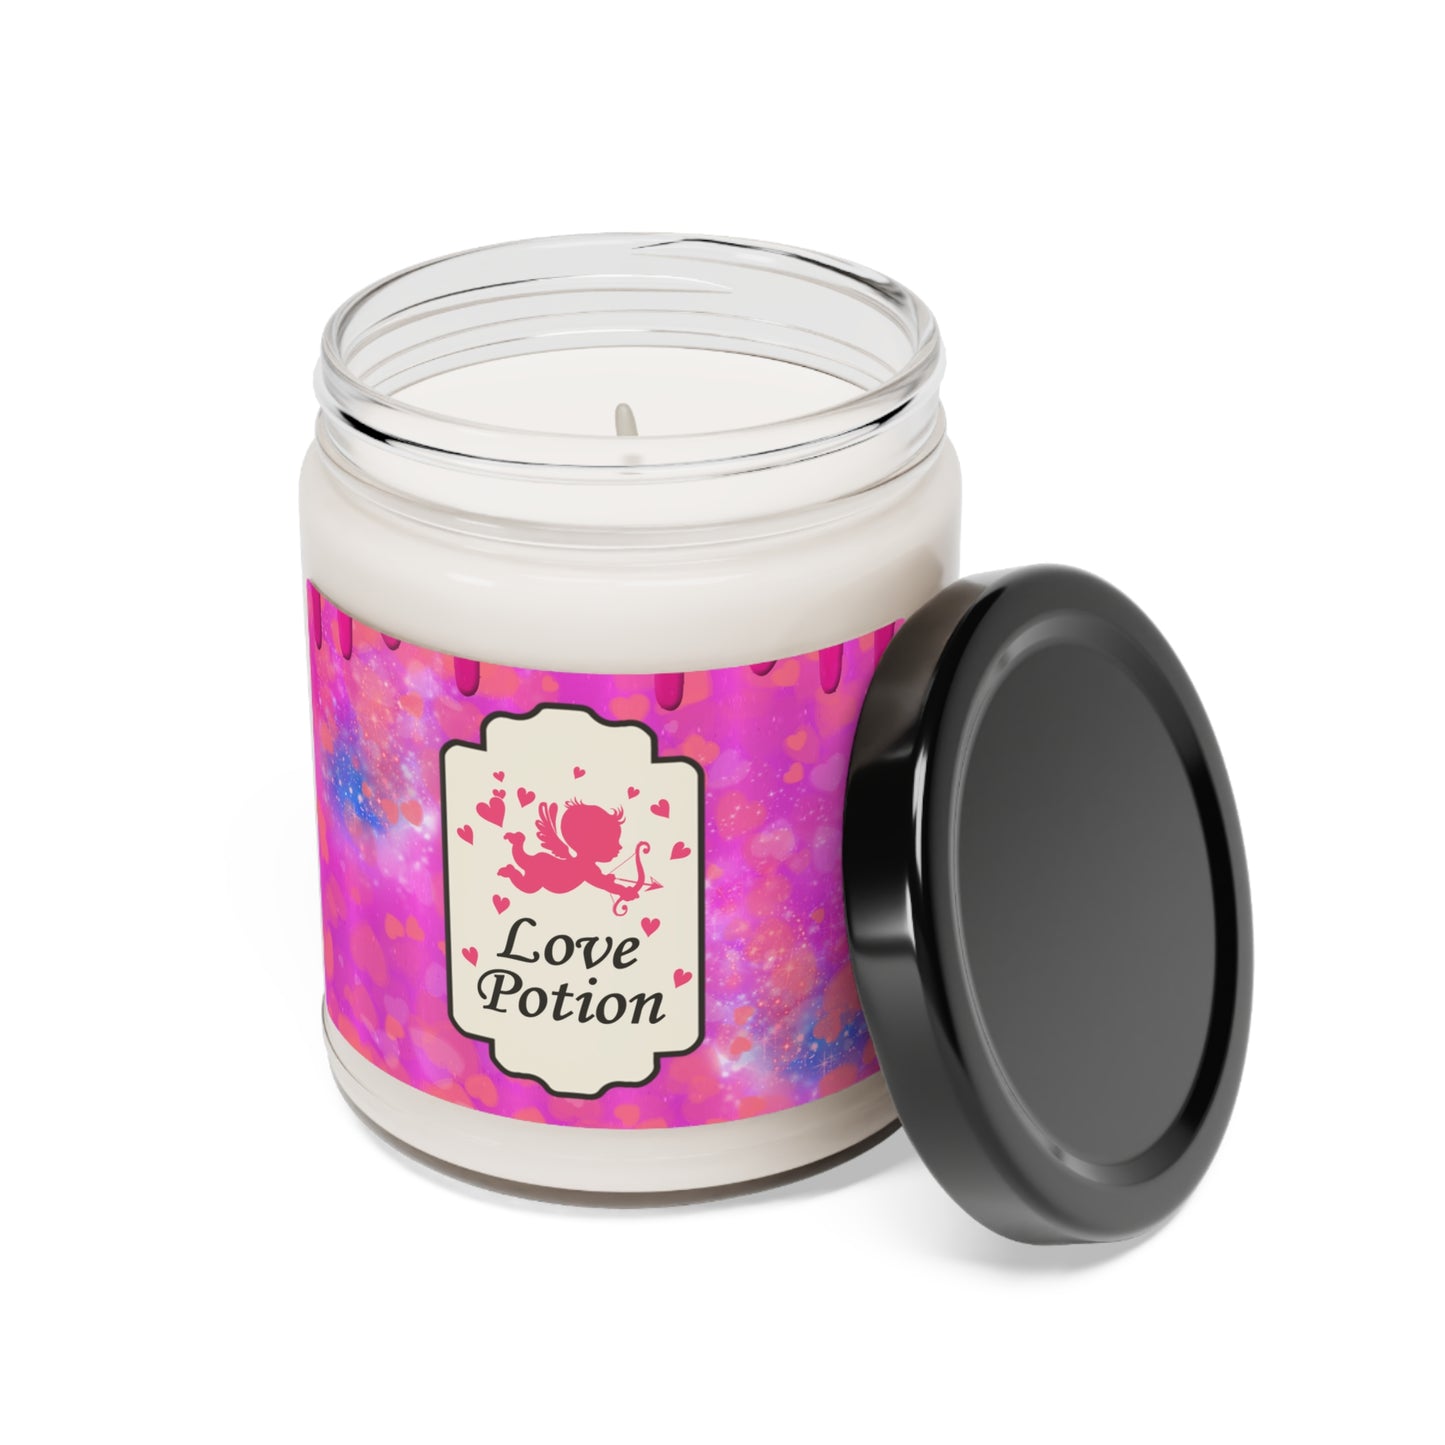 Love Potion Scented Soy Candle | Valentines Gift | Gifts for Her | Scented Candle | Gifts